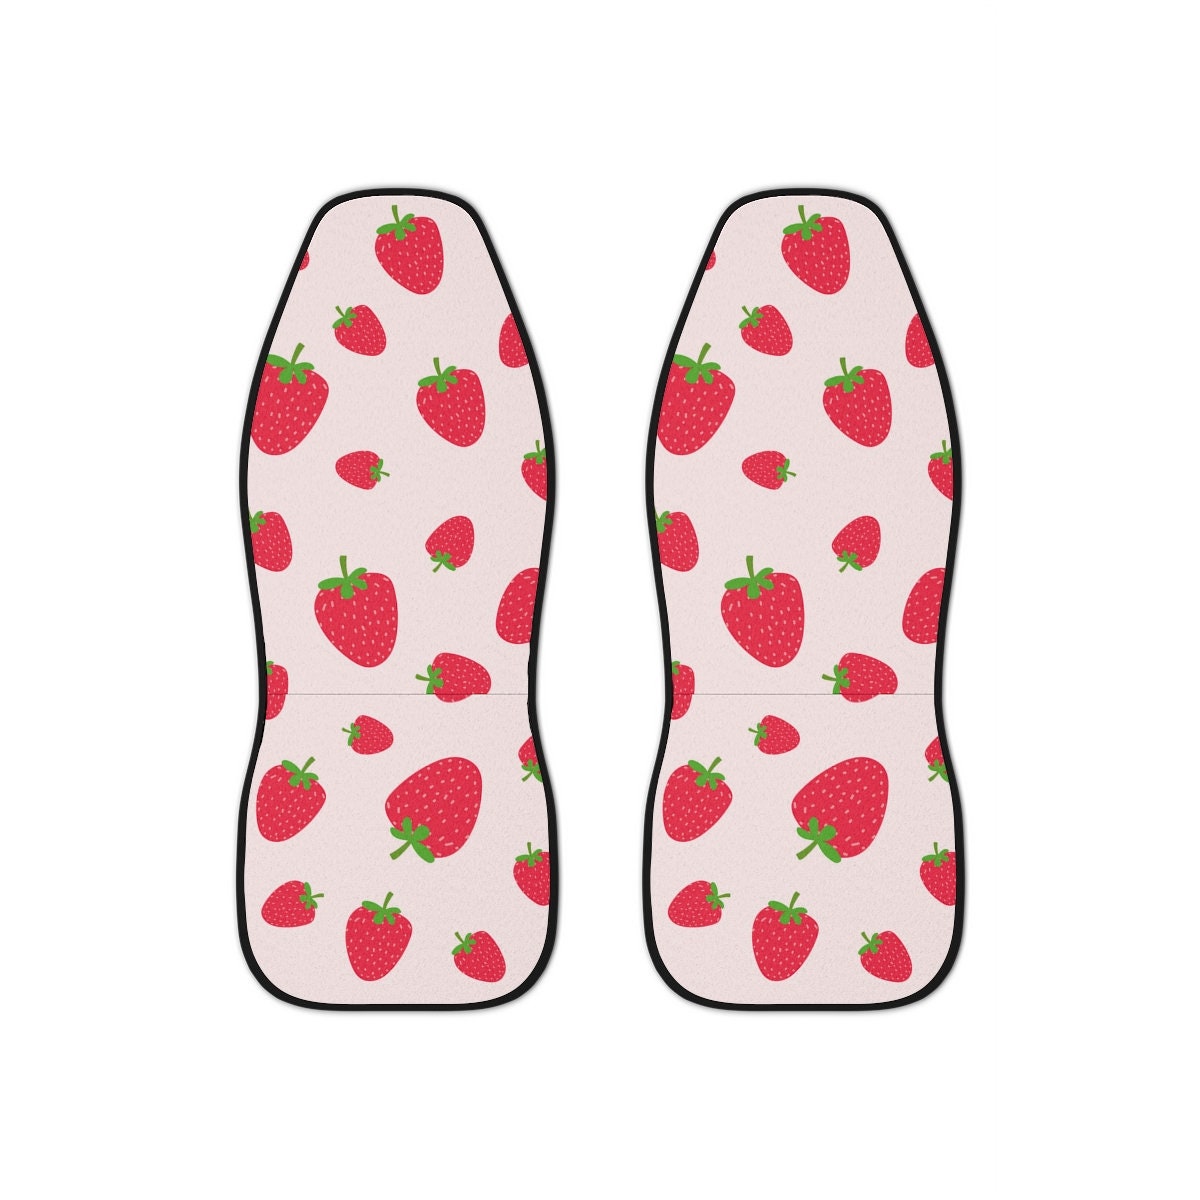 Strawberry Car Seat Covers, Strawberry Cute Car Accessories for Women